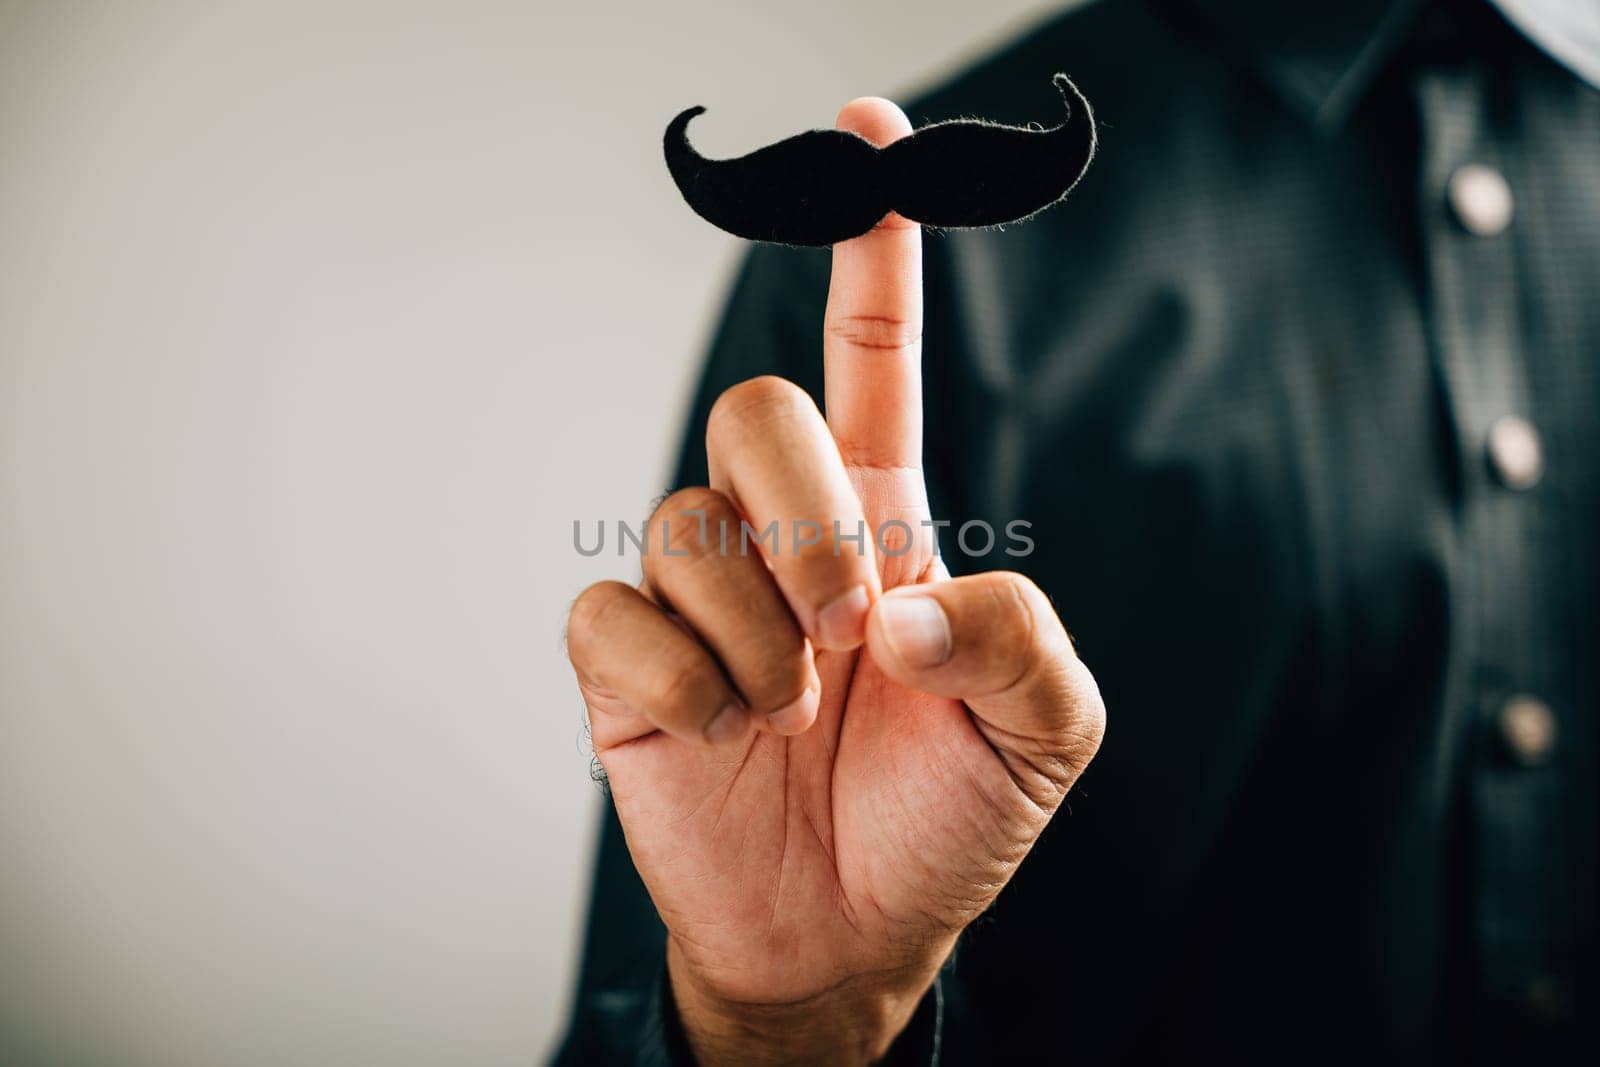 In support of Prostate Cancer Awareness, a man holds a mustache with fun and dedication by Sorapop